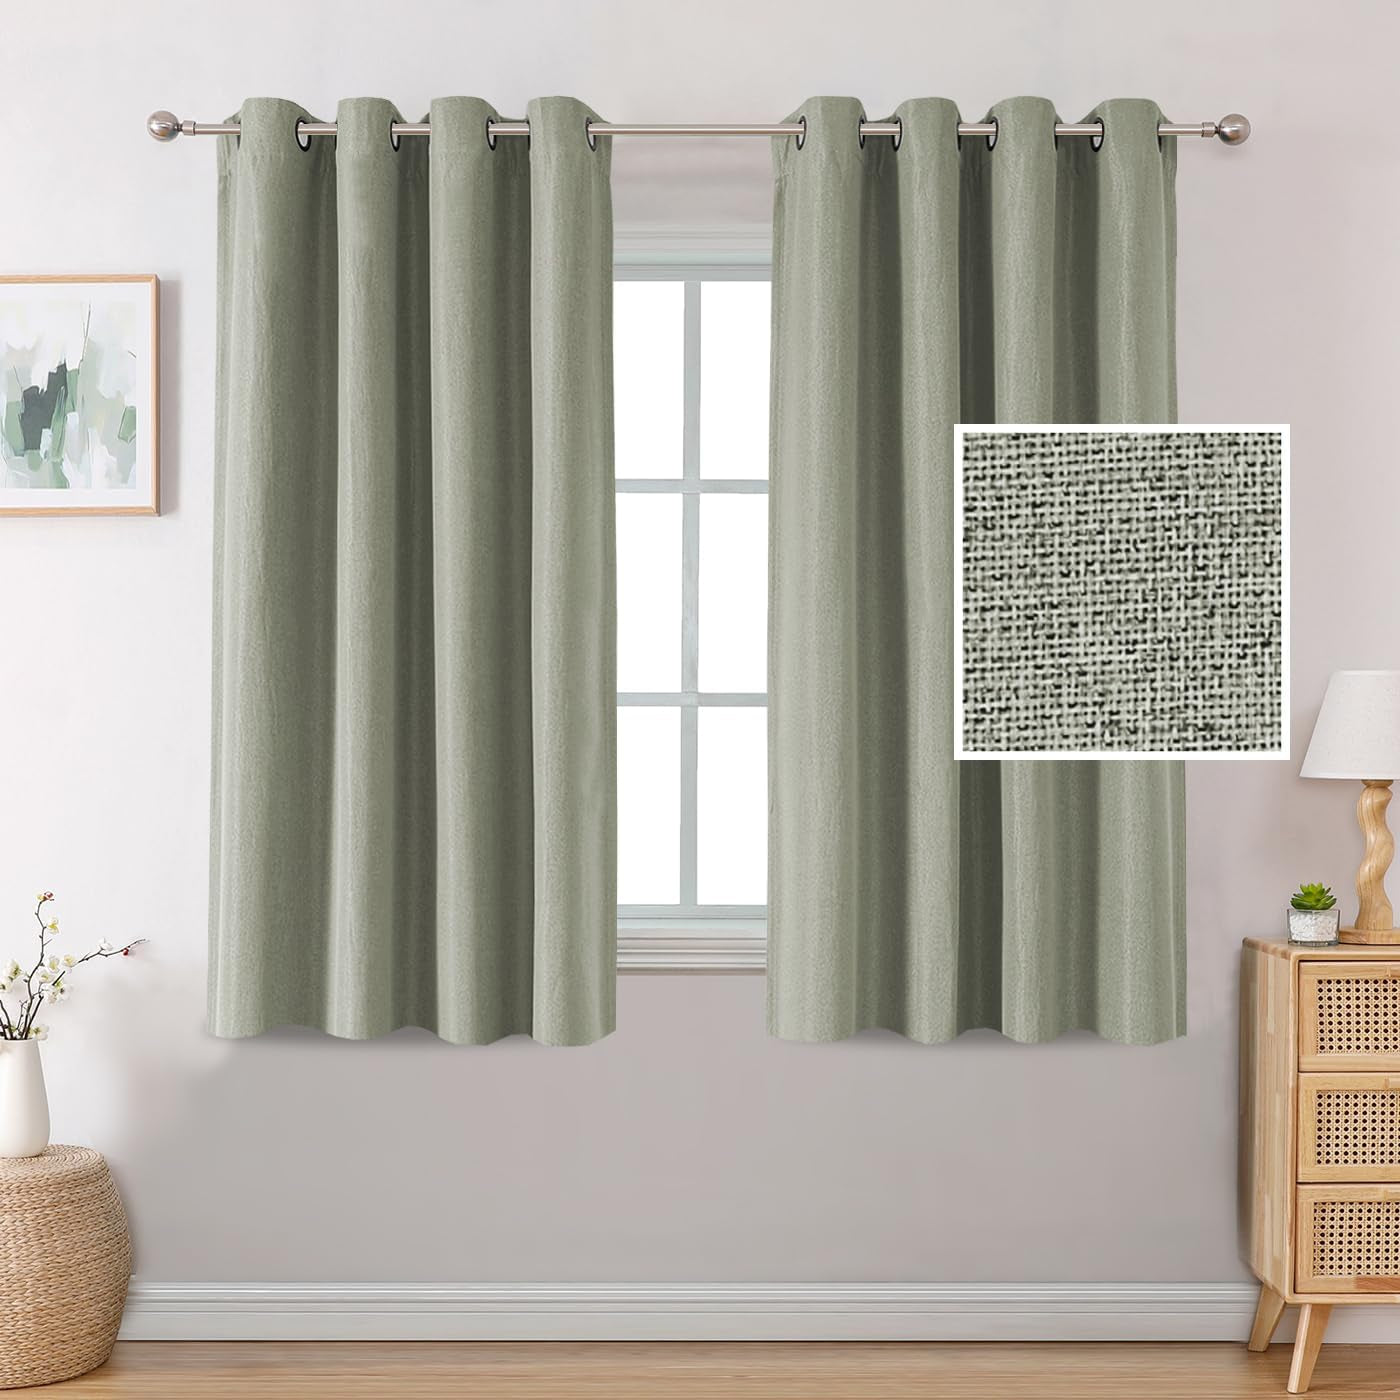 H.VERSAILTEX Linen Blackout Curtains 84 Inches Long Thermal Insulated Room Darkening Linen Curtains for Bedroom Textured Burlap Grommet Window Curtains for Living Room, Bluestone and Taupe, 2 Panels  H.VERSAILTEX Sage 52"W X 45"L 